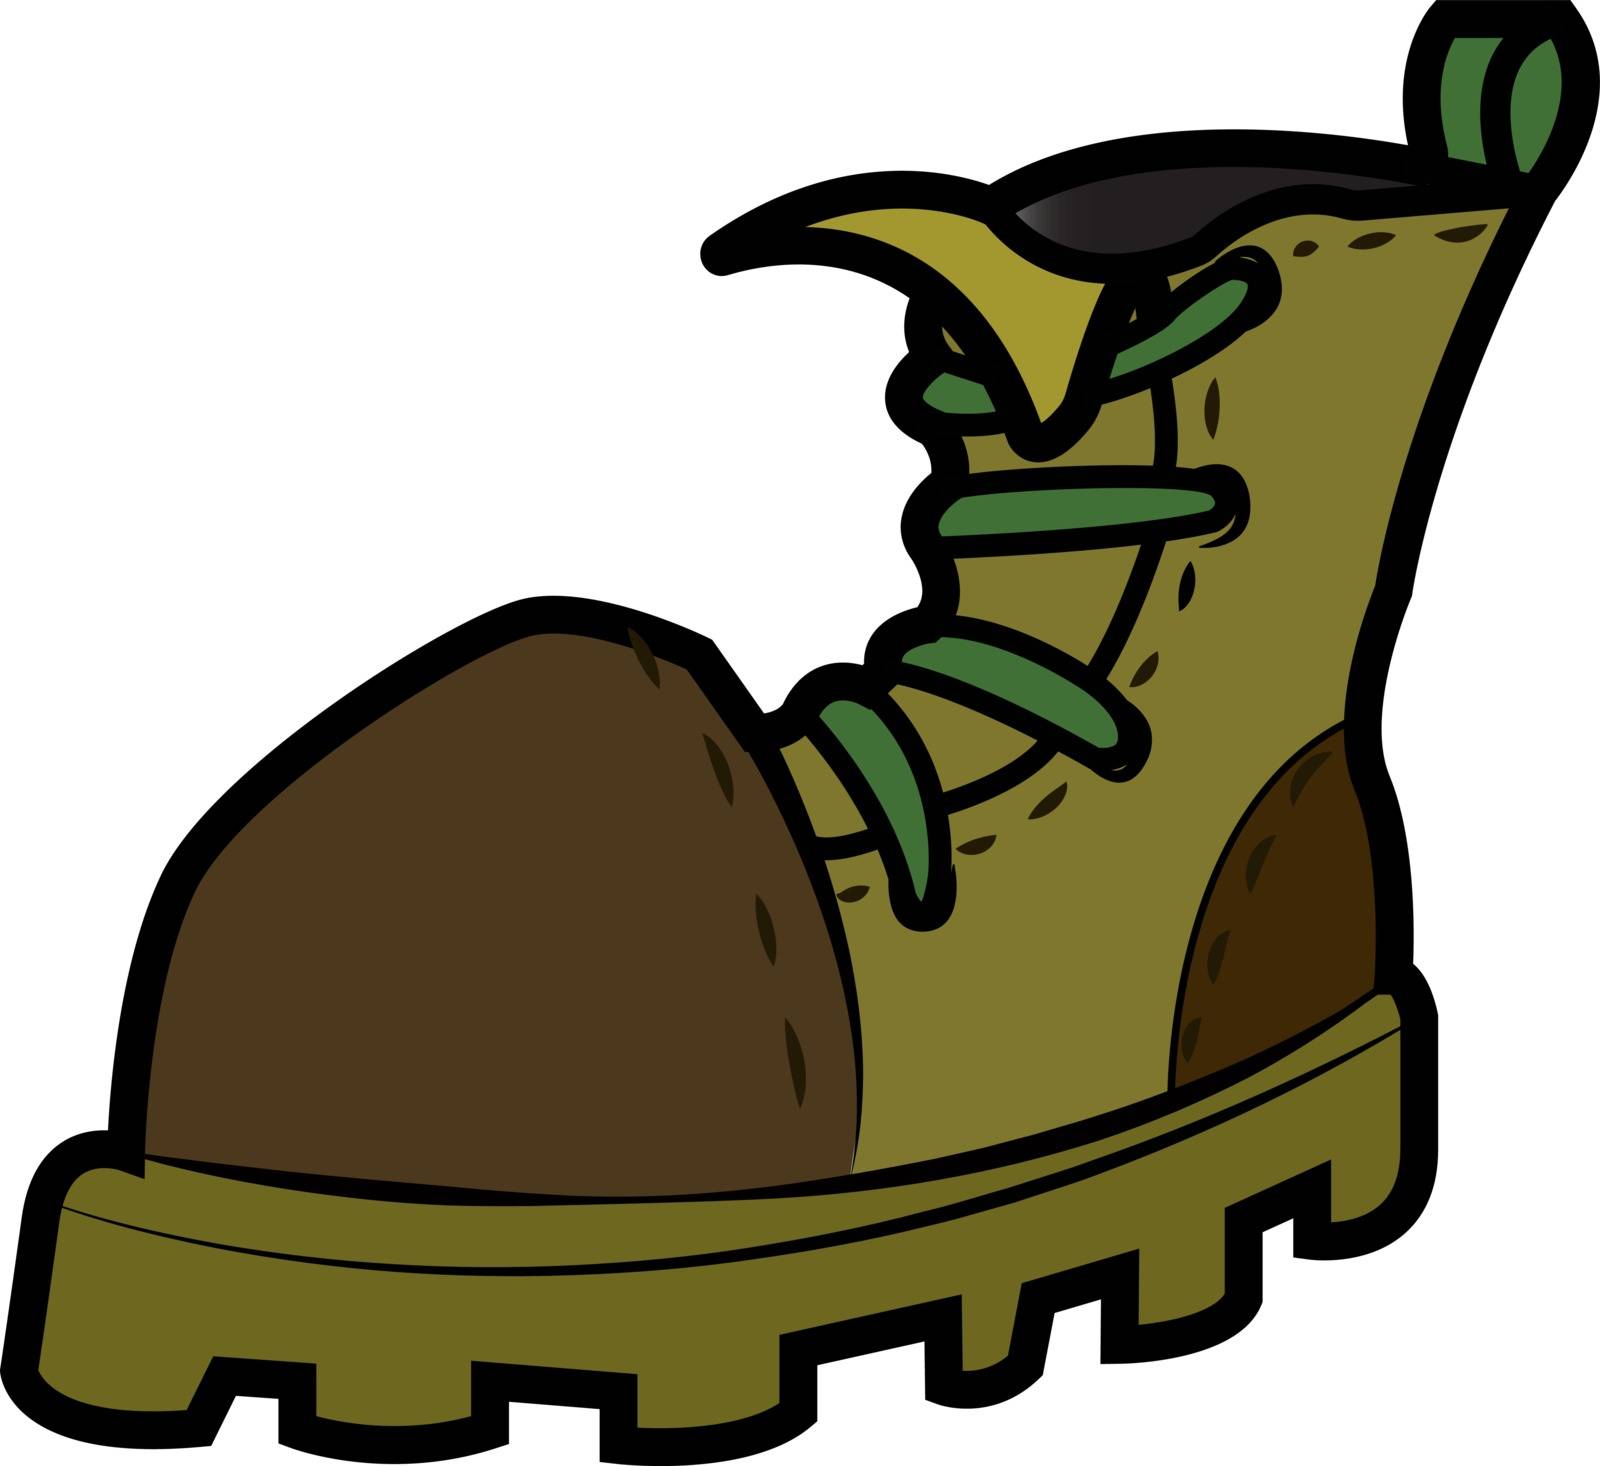 Illustration of a high ankle boot in dark grey & green color and with lace generally used by army vector color drawing or illustration 